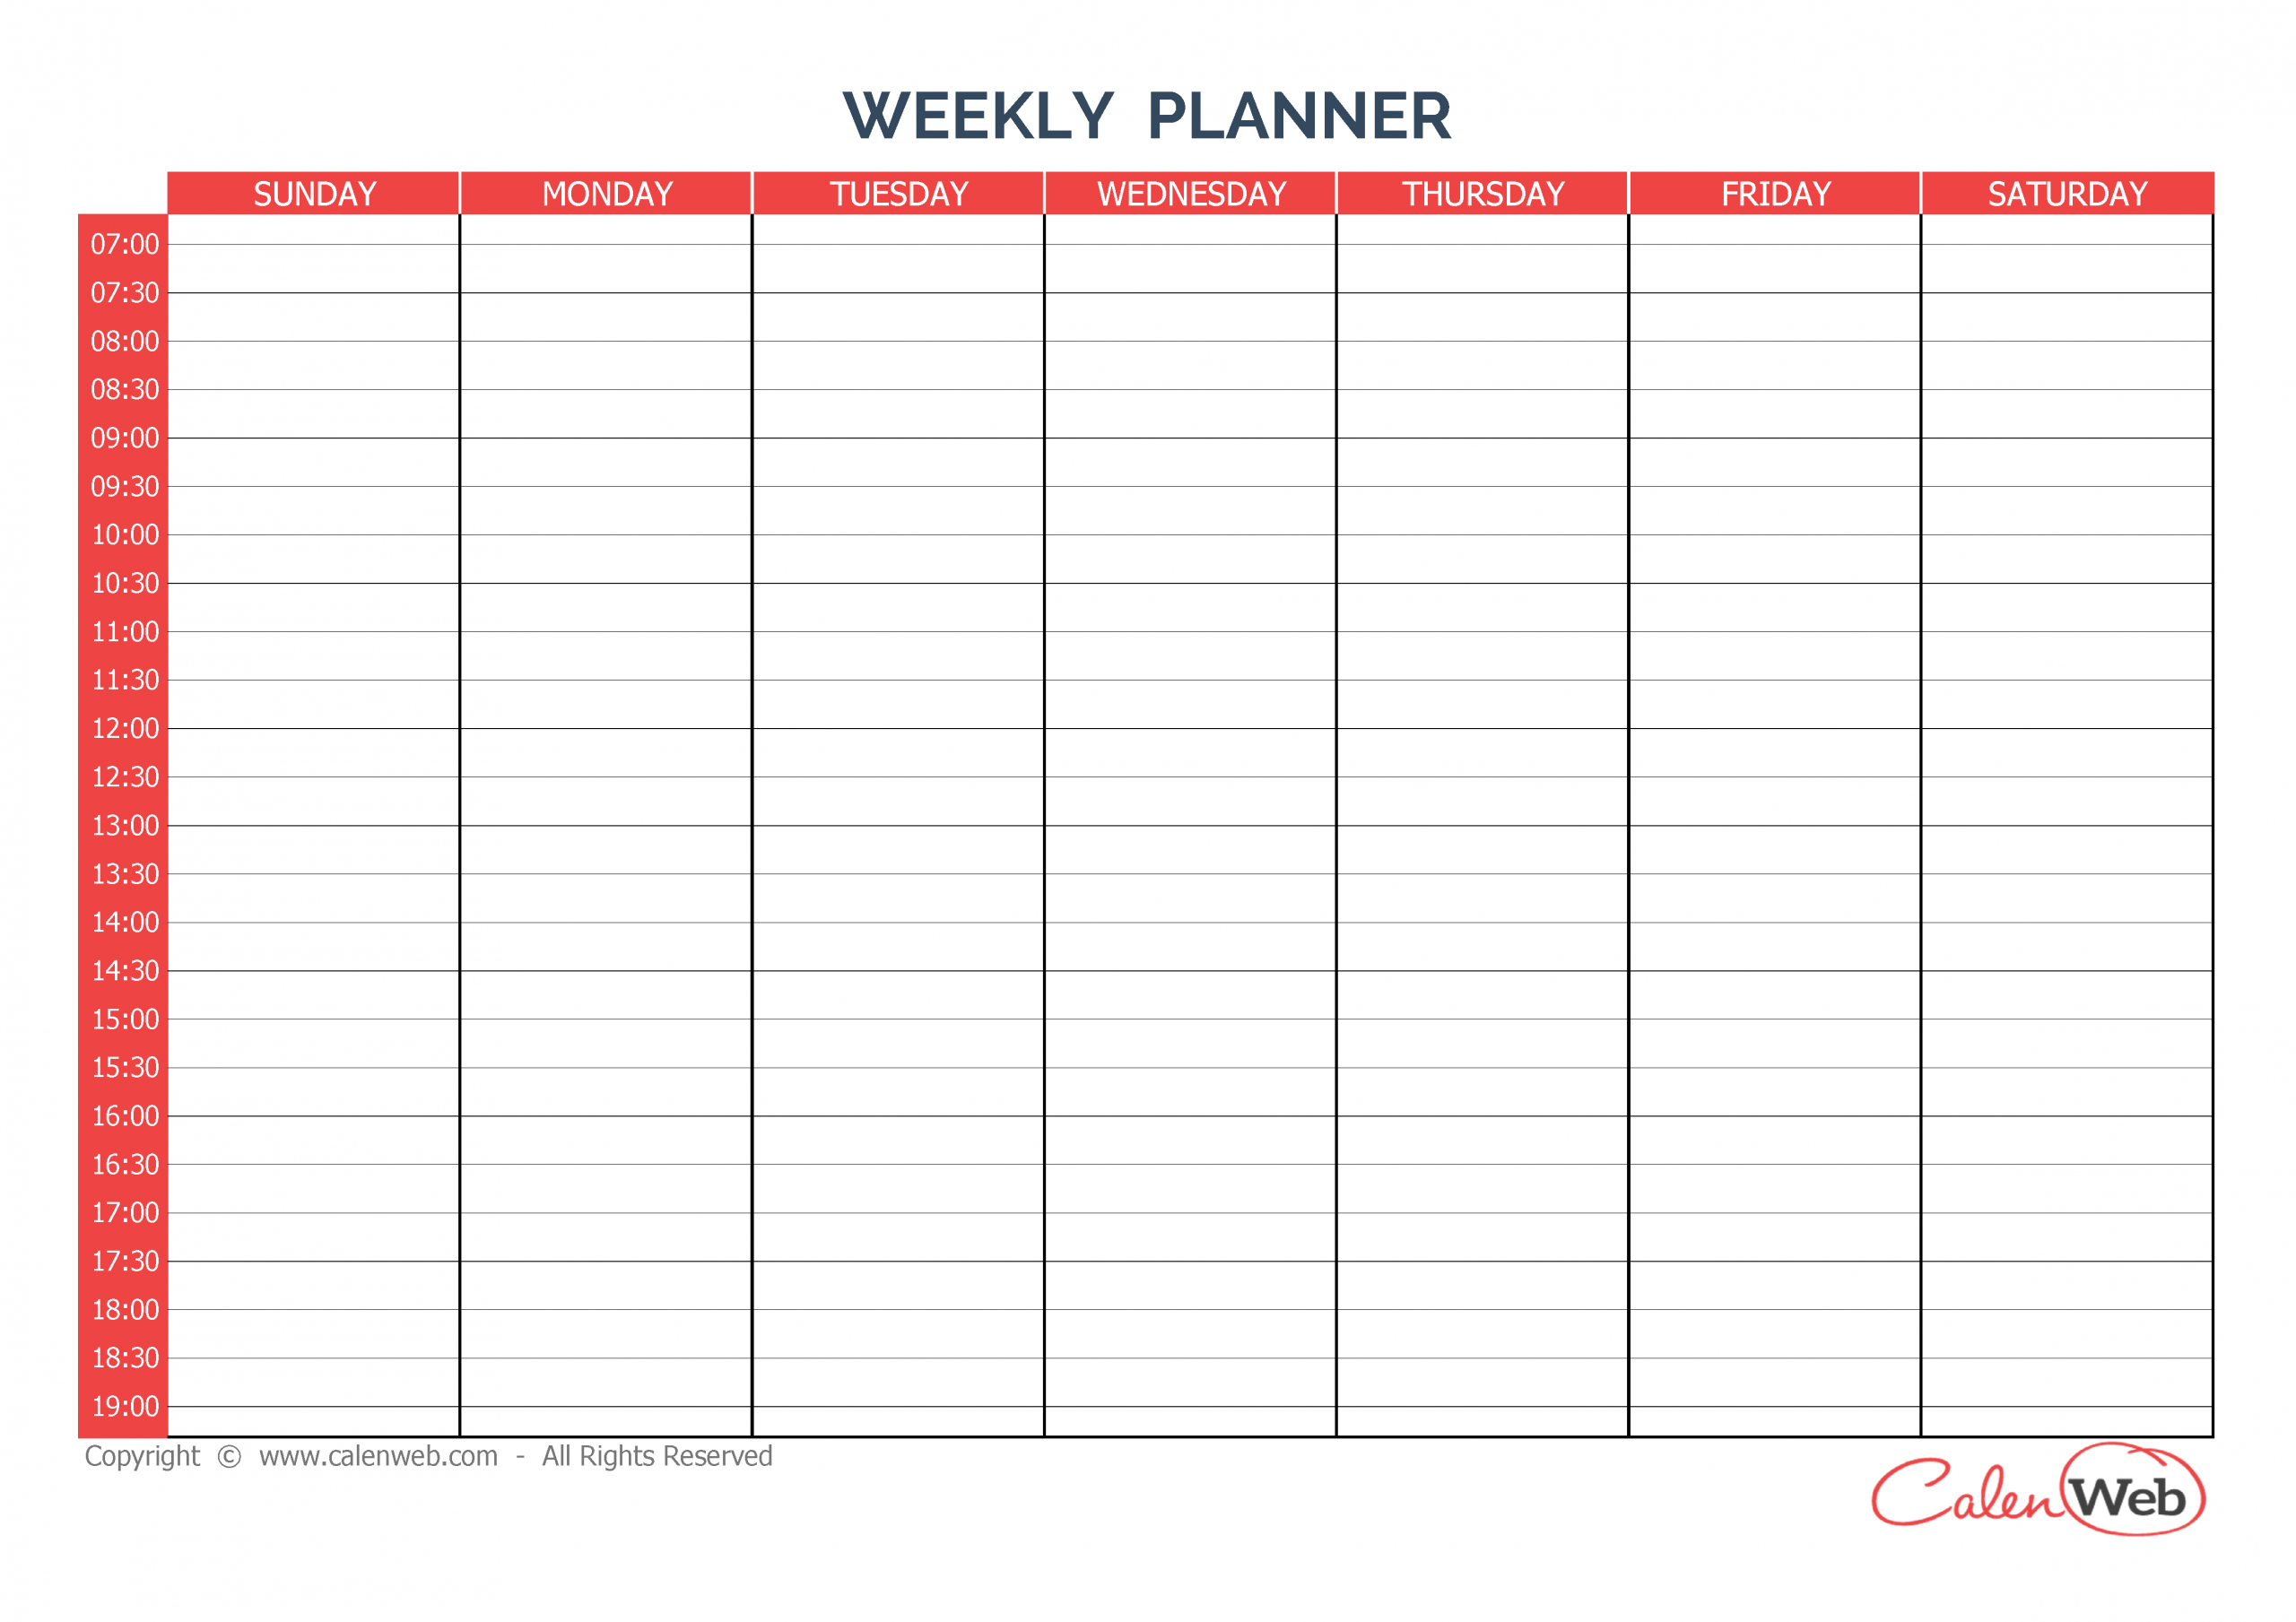 weekly planner 7 days first day sunday a week of 7 days